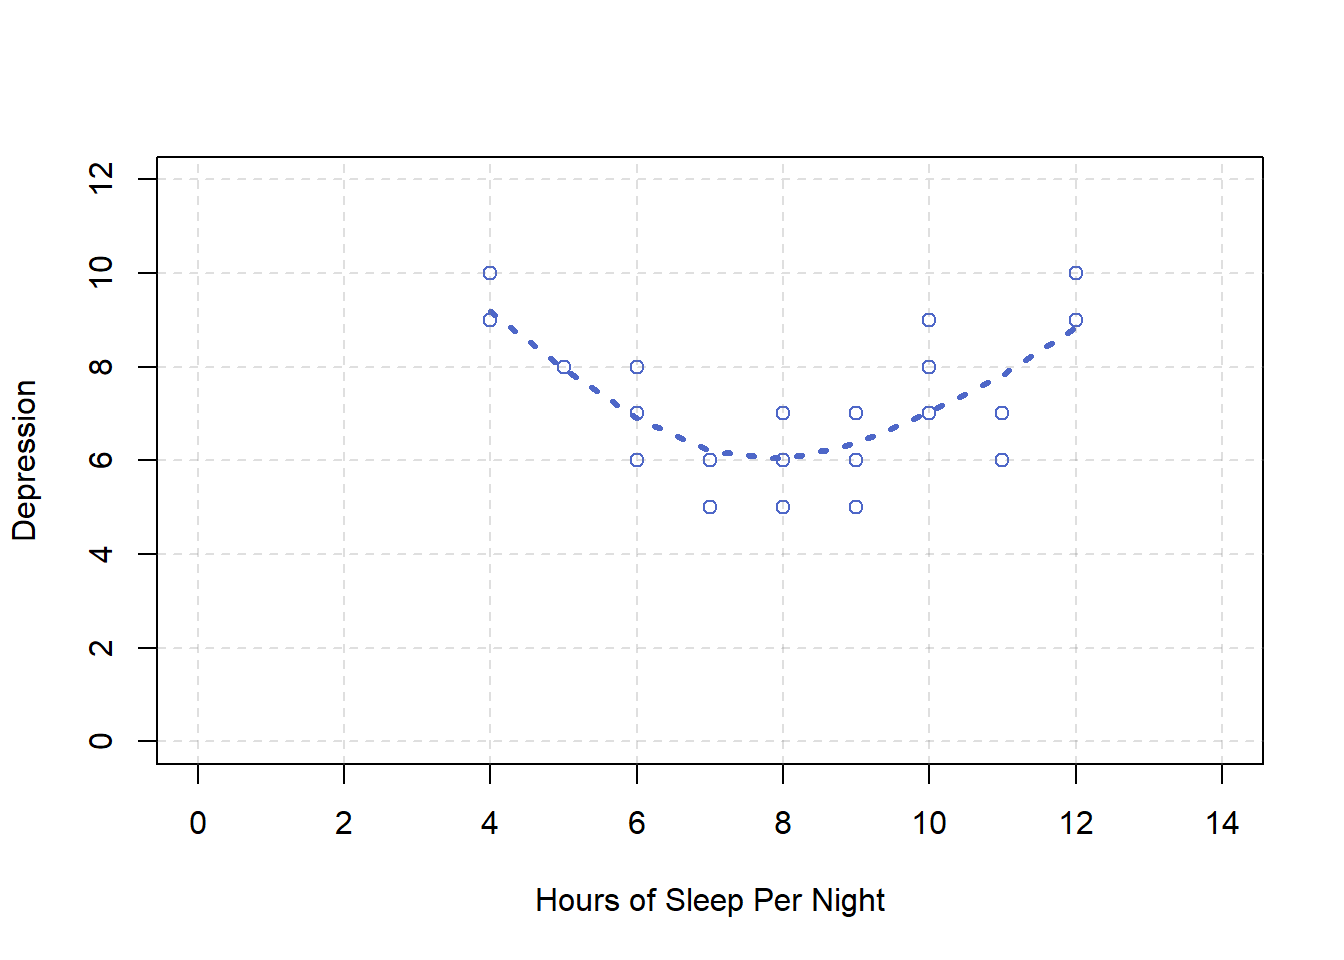 Hypothetical nonlinear relationship between sleep and depression.